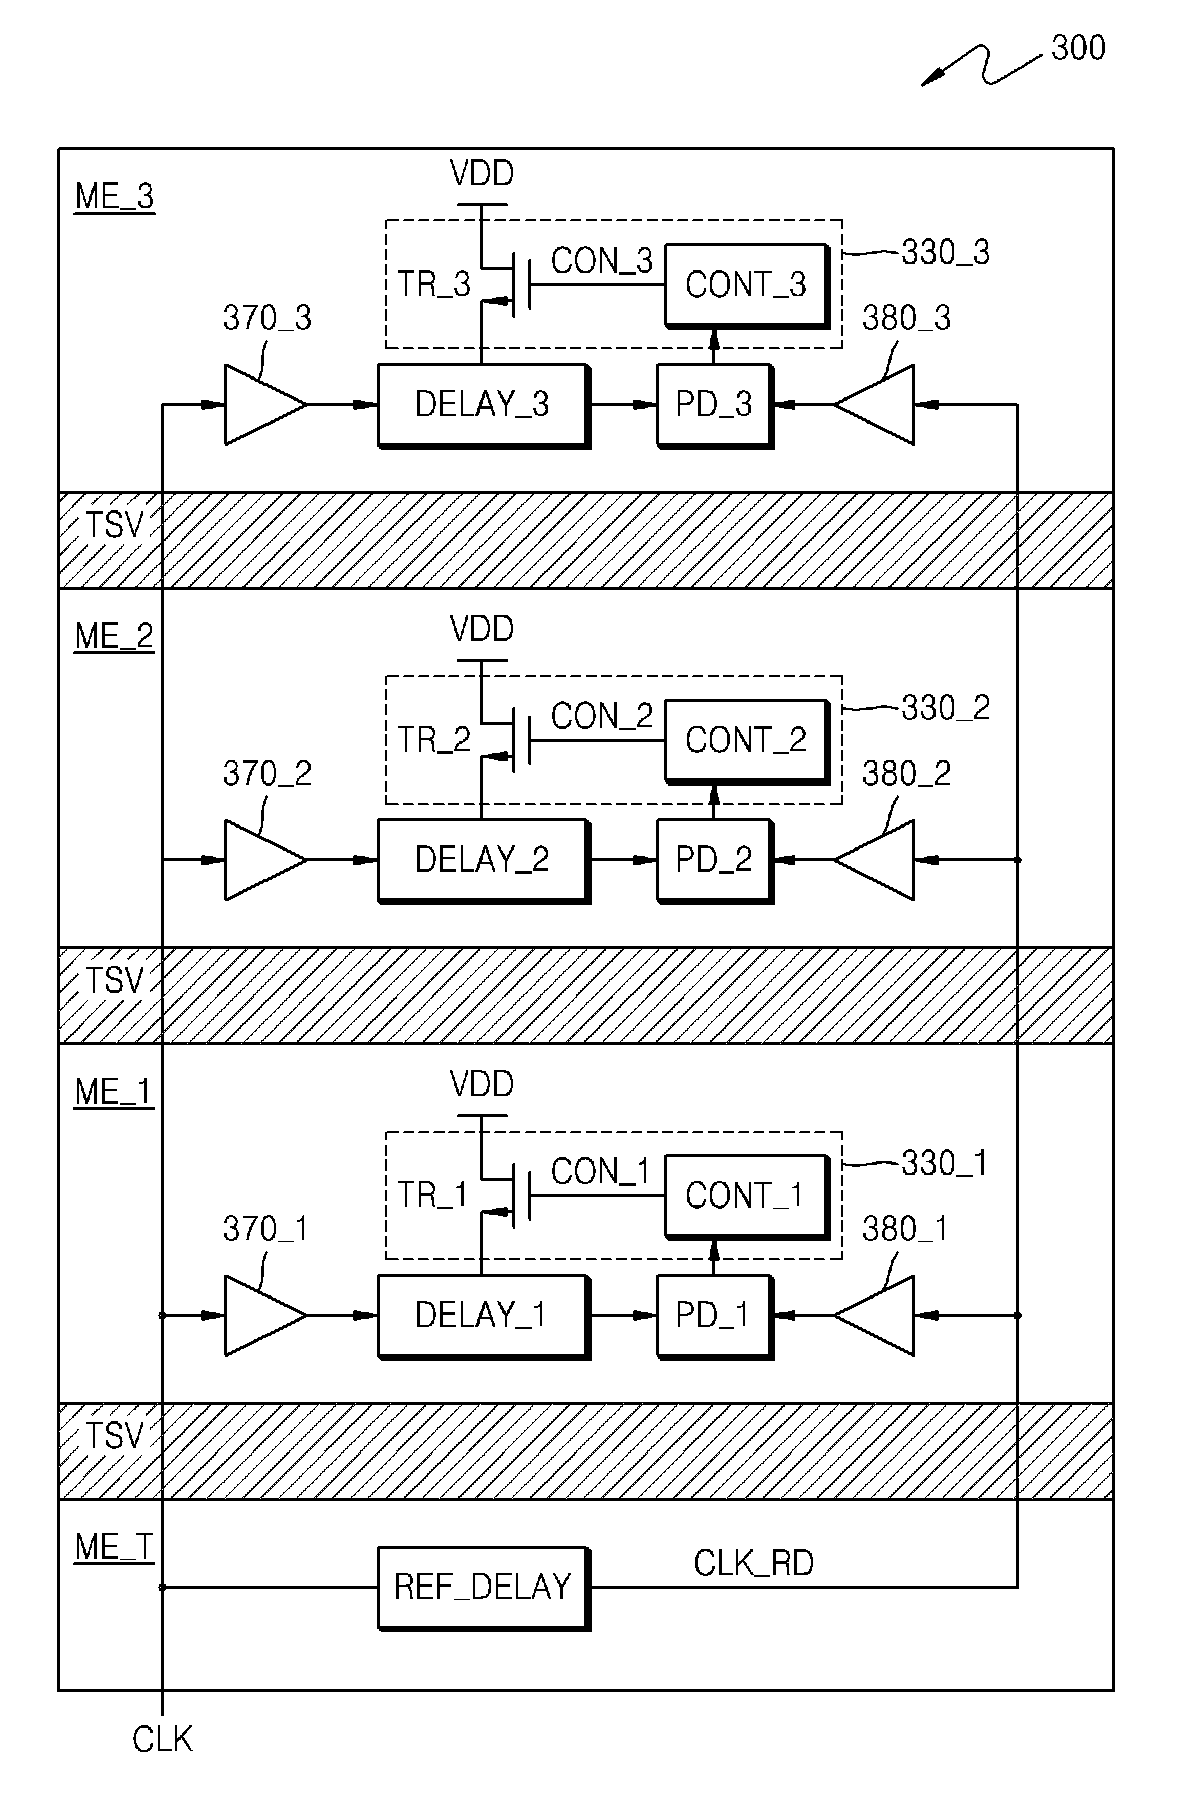 Process variation compensated multi-chip memory package